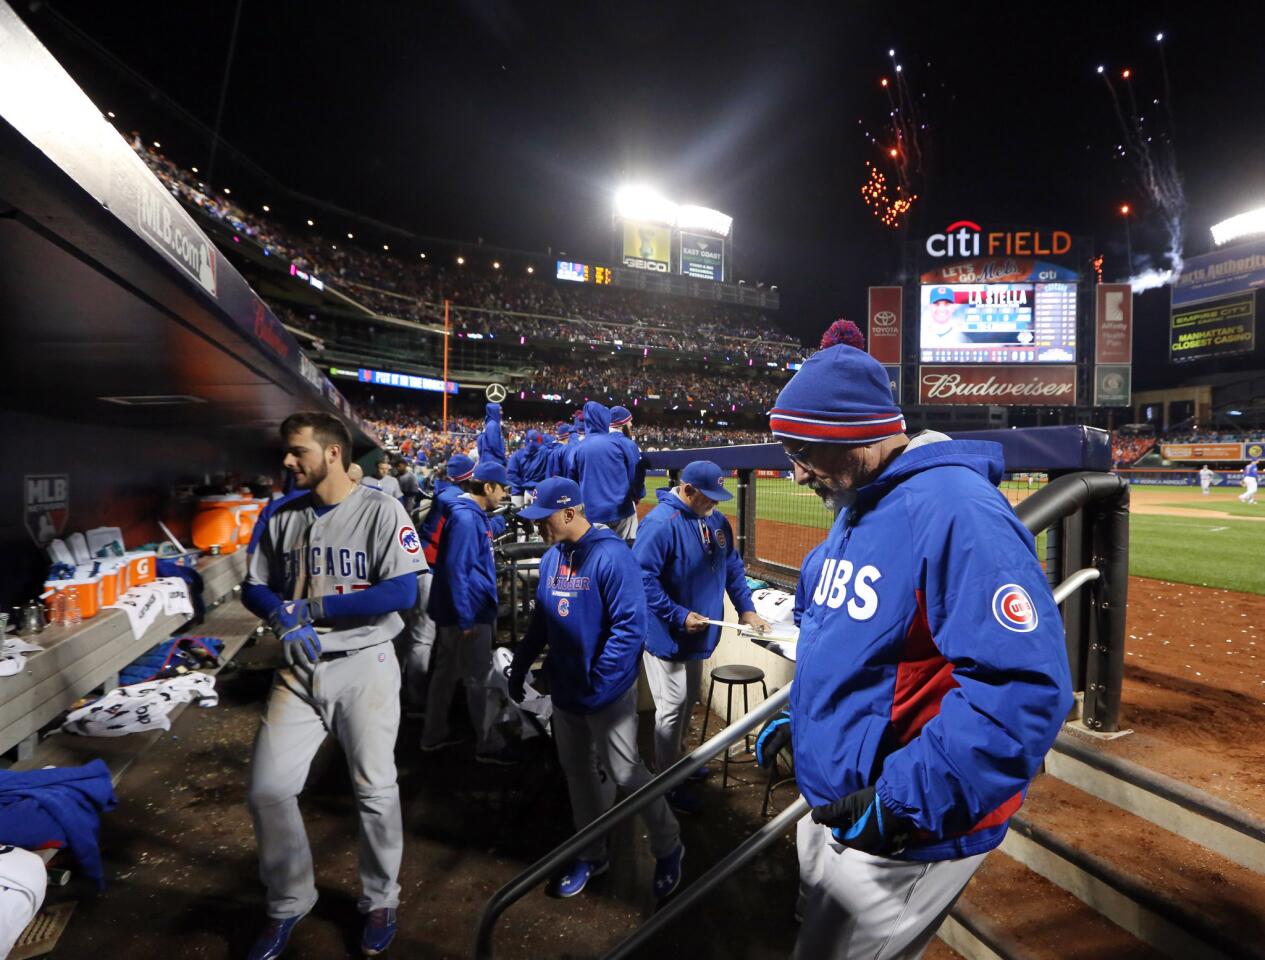 Cubs manager Joe Maddon and his team head in after the loss in Game 1 of the NLCS playoff Oct. 17, 2015, at Citi Field in New York. The Mets defeated the Cubs, 4-2.